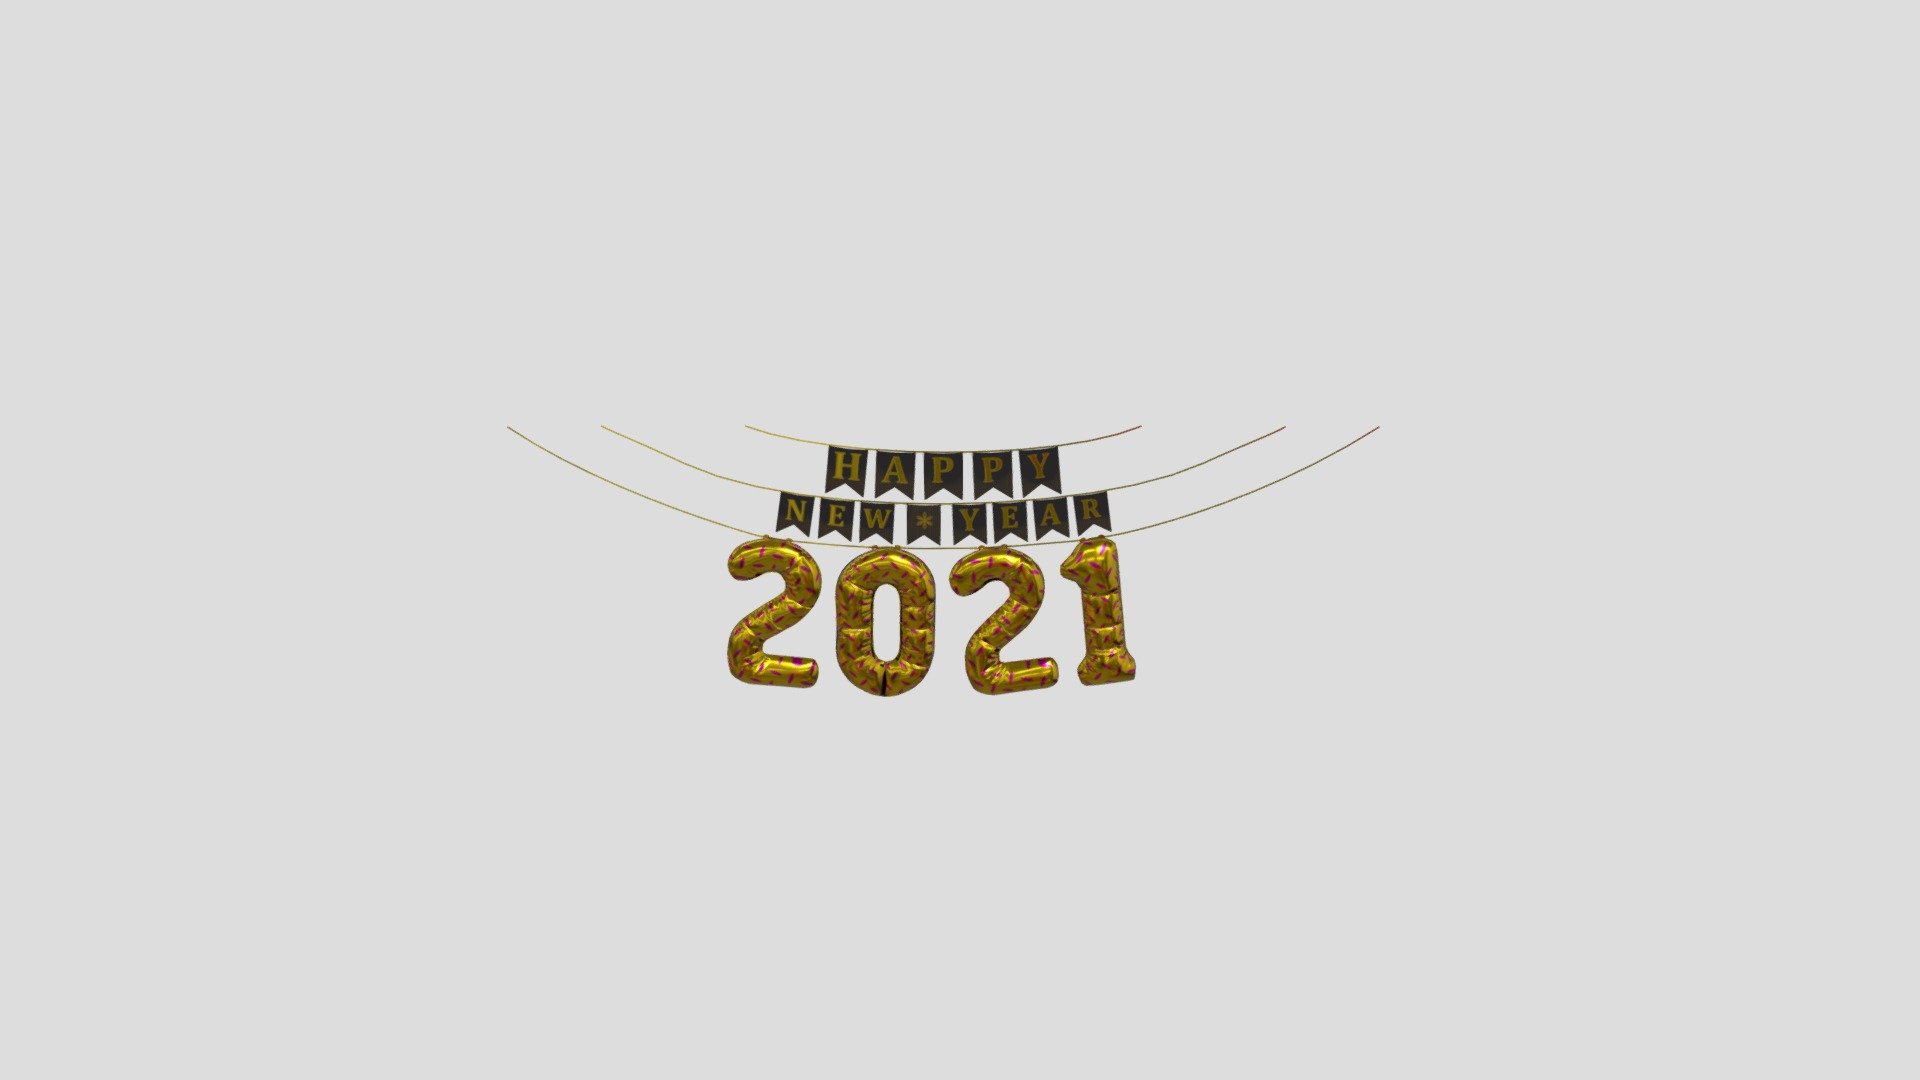 With this Happy New Year 2021! folks using the bicoco AR app celebrated the new year, only available at the bicoco app 3d model